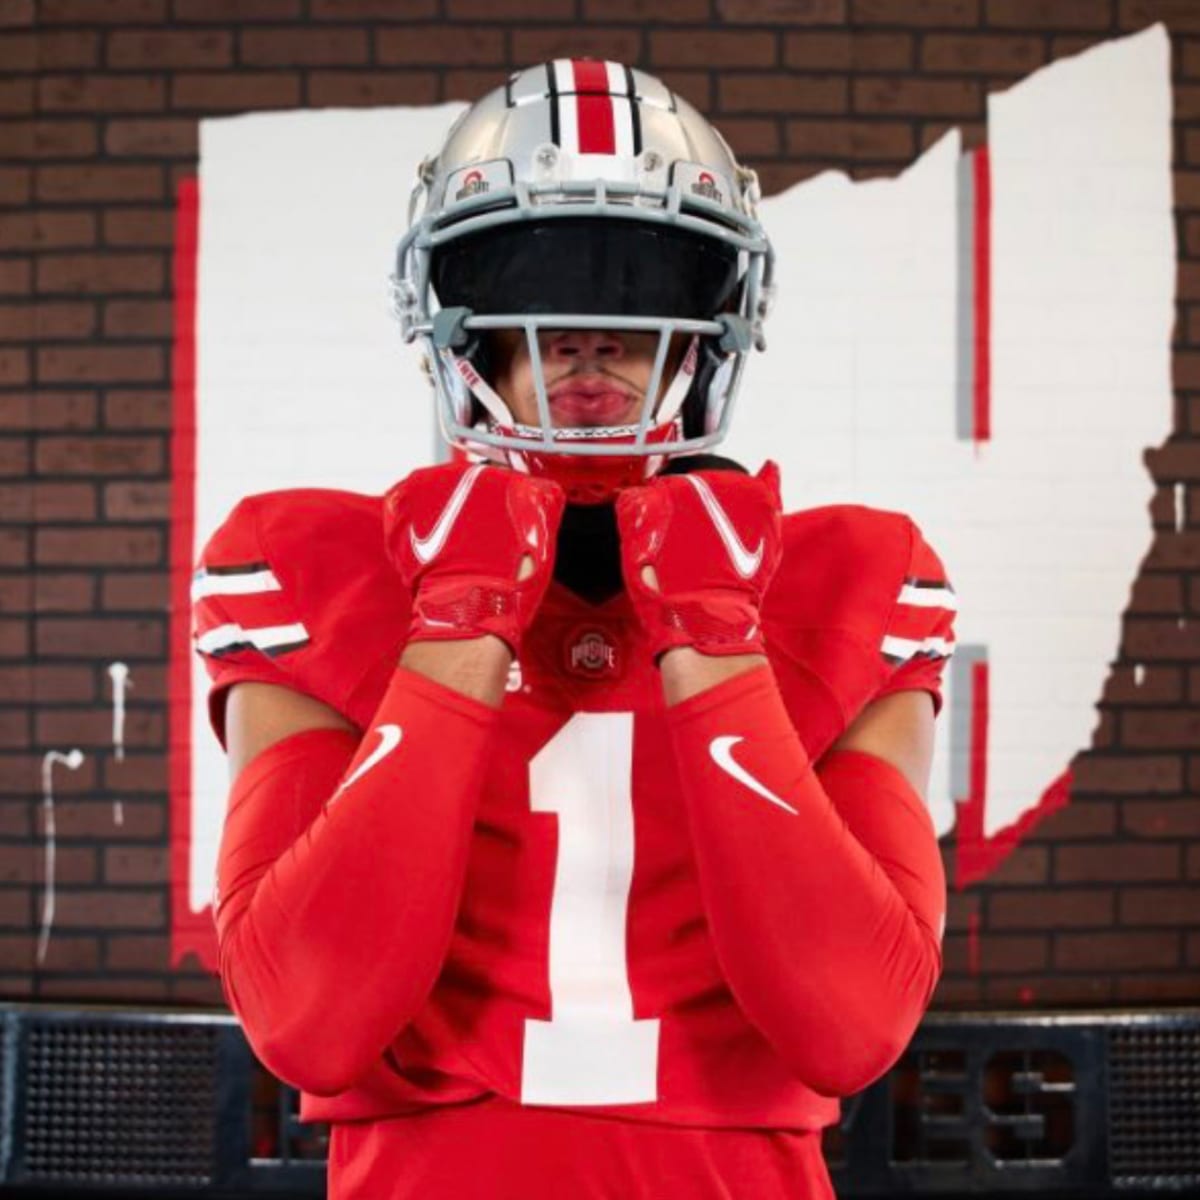 BREAKING: Ohio State Buckeyes Lands Commitment From 4-Star CB